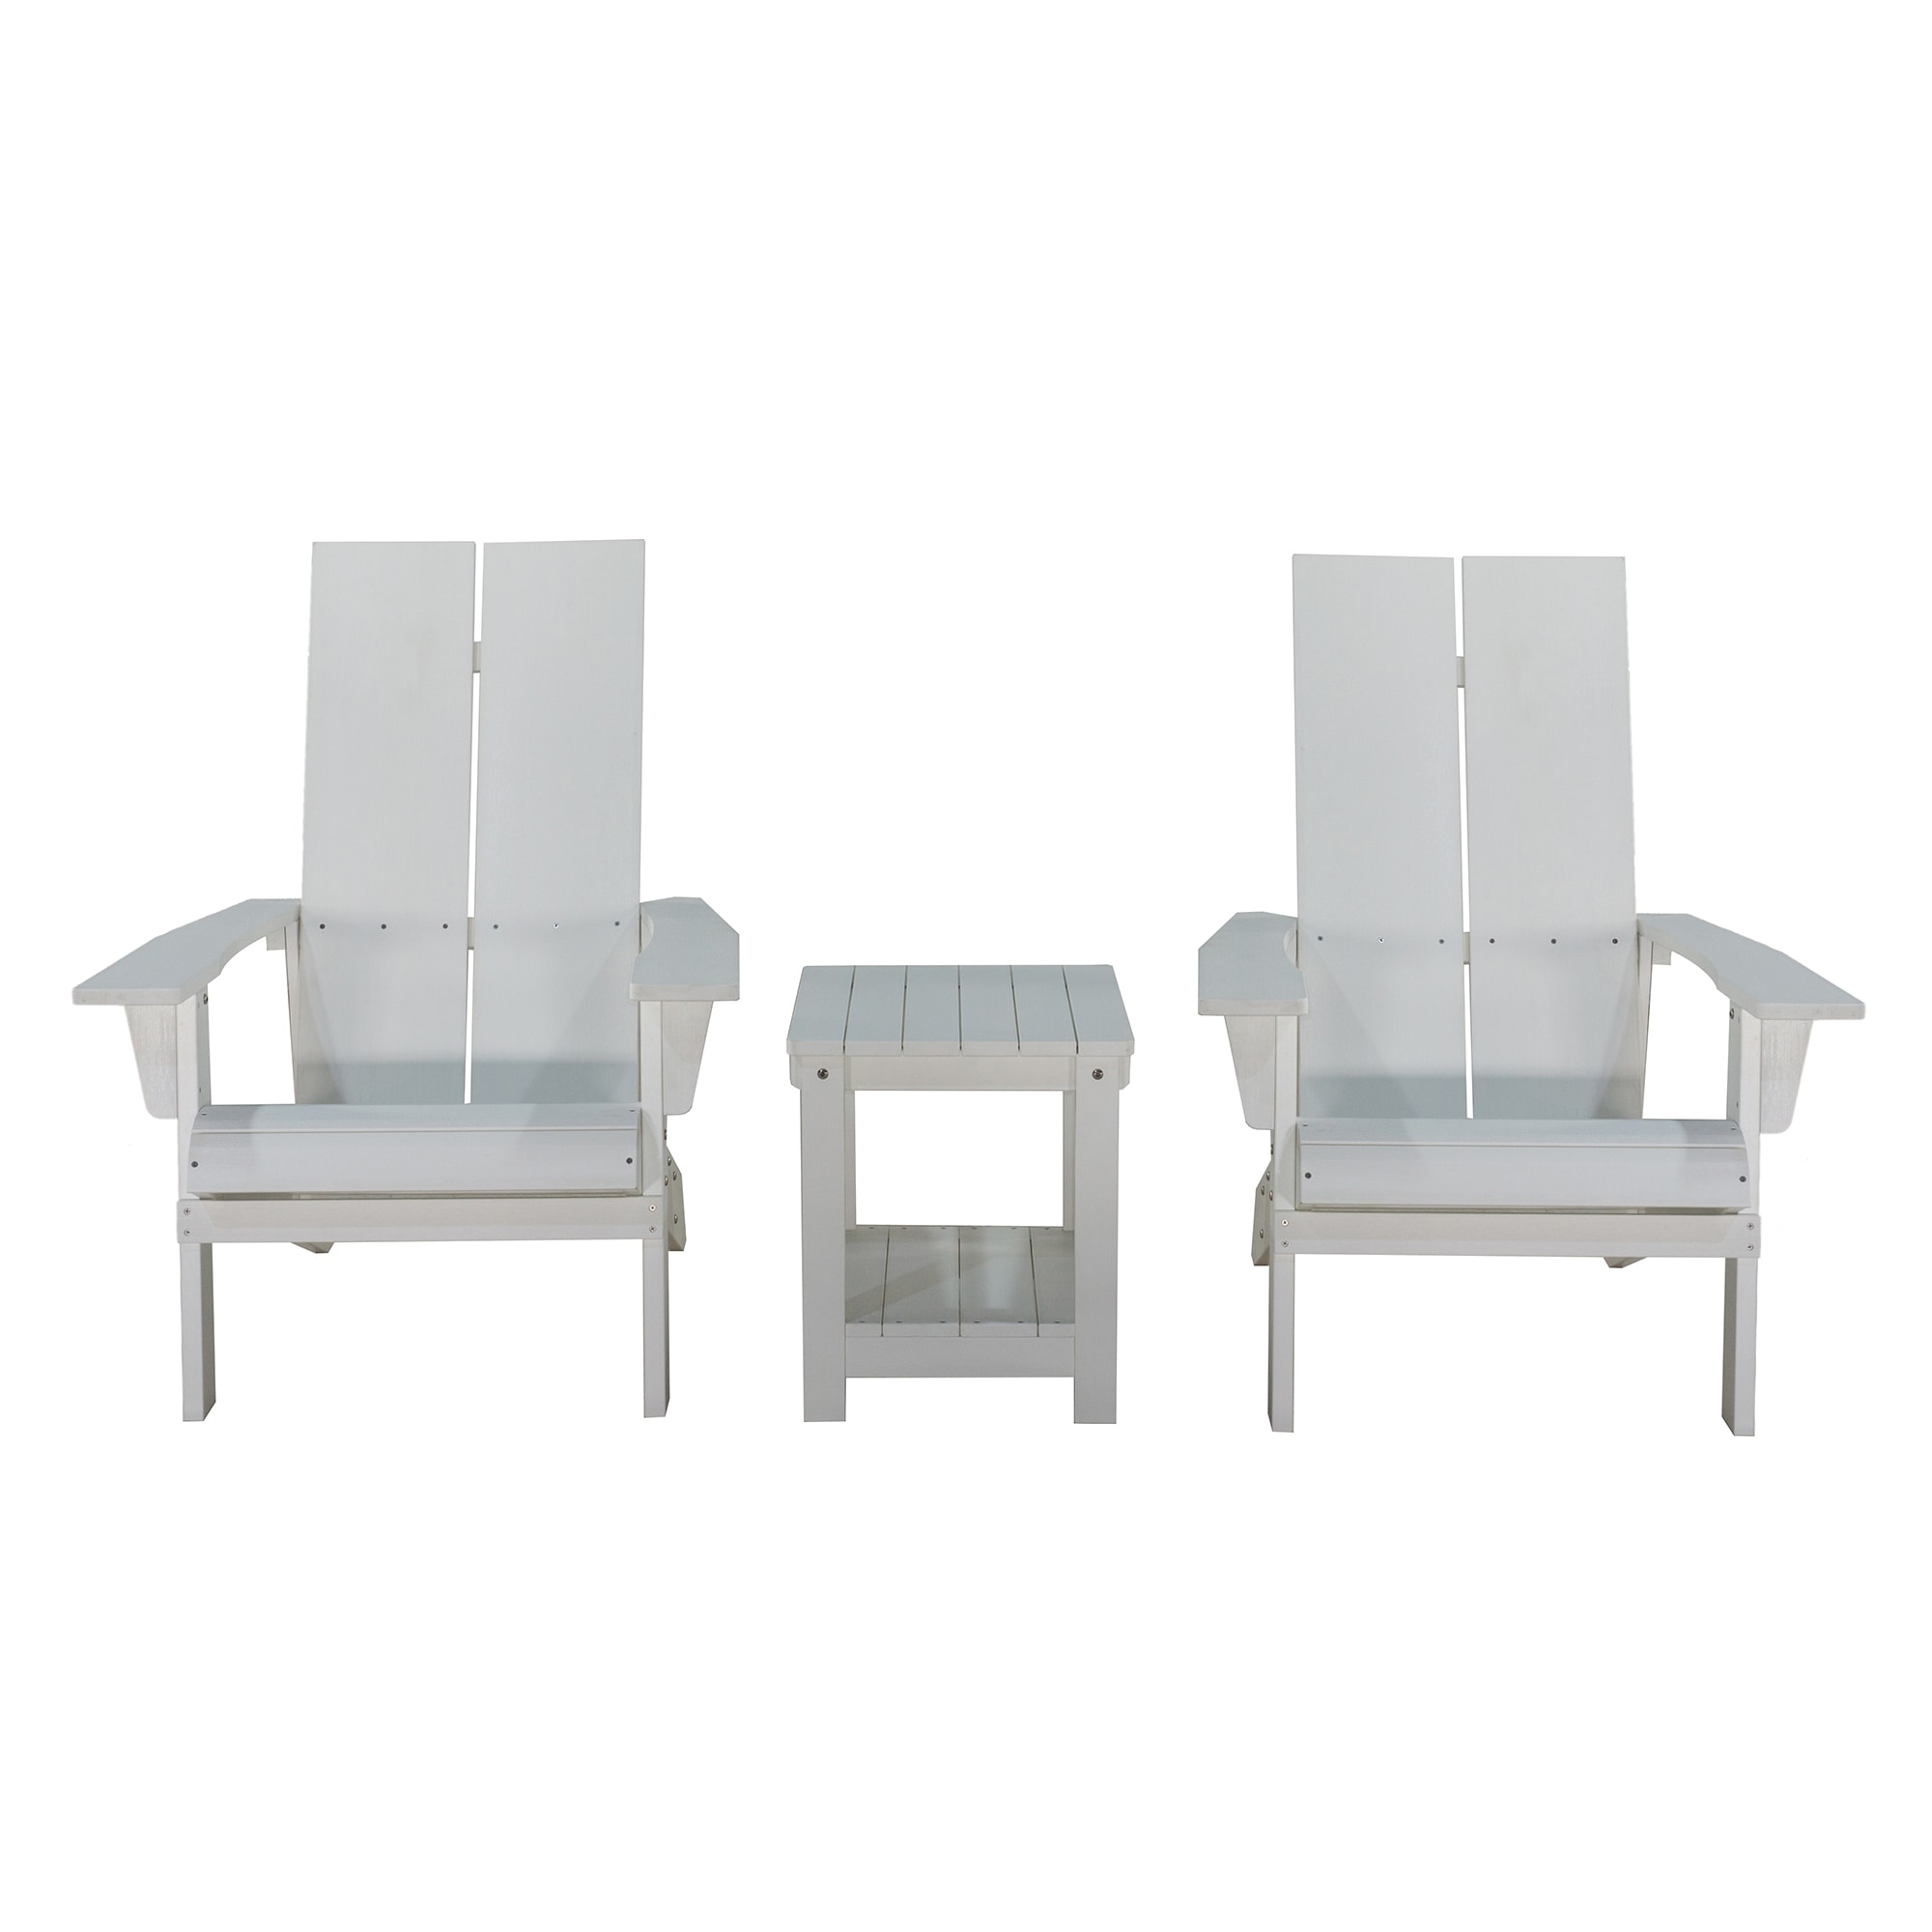 3 Piece Patio Furniture Set  Outdoor Conversation Set Bistro Chaise Set With Rectangular Side End Table  For Garden  Porch